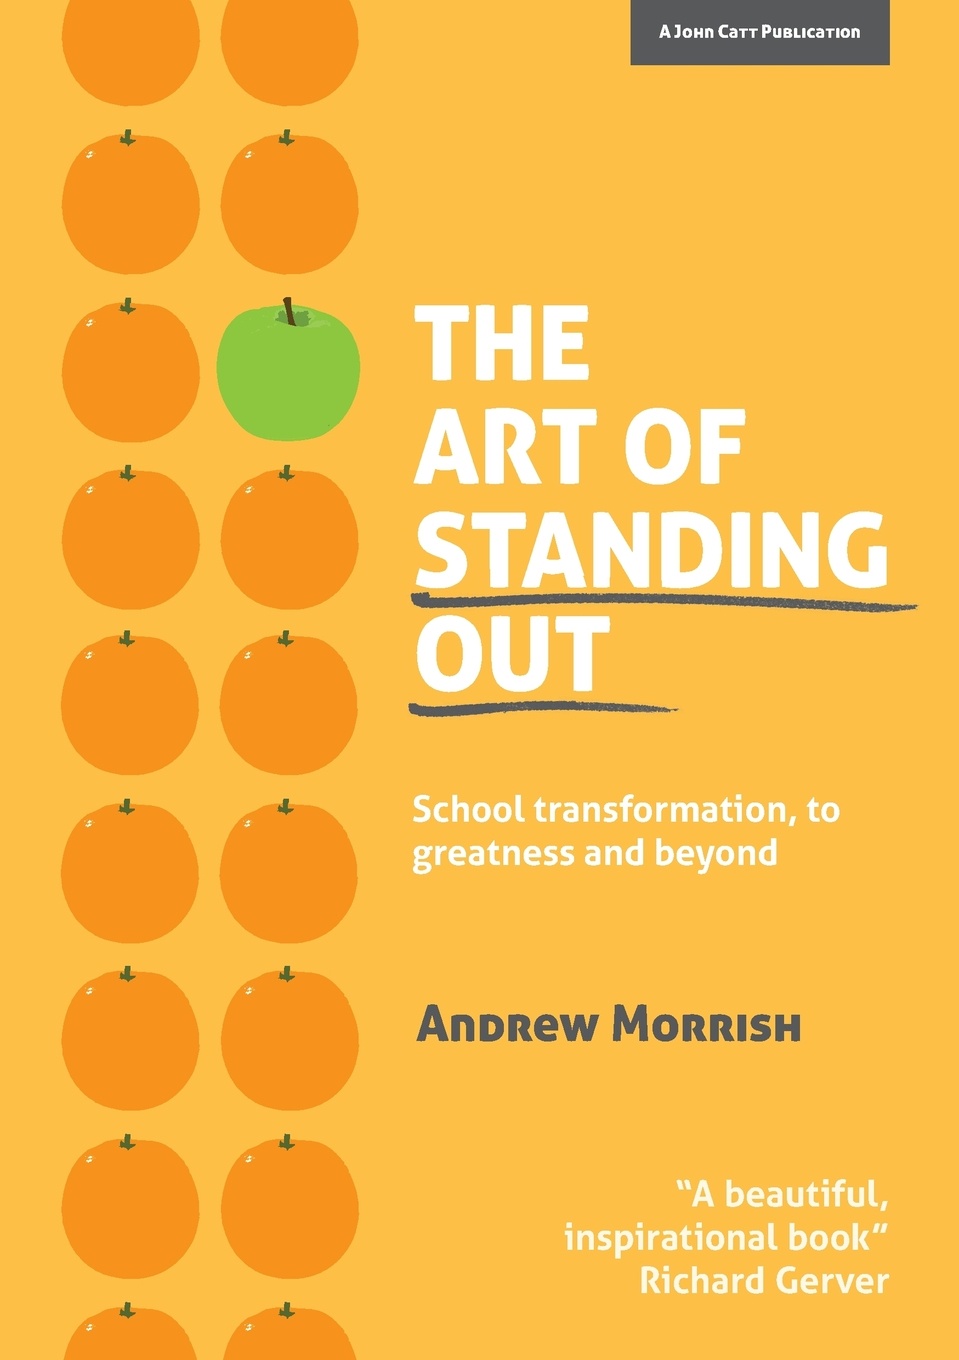 The Art of Standing Out. School Transformation, to greatness and beyond